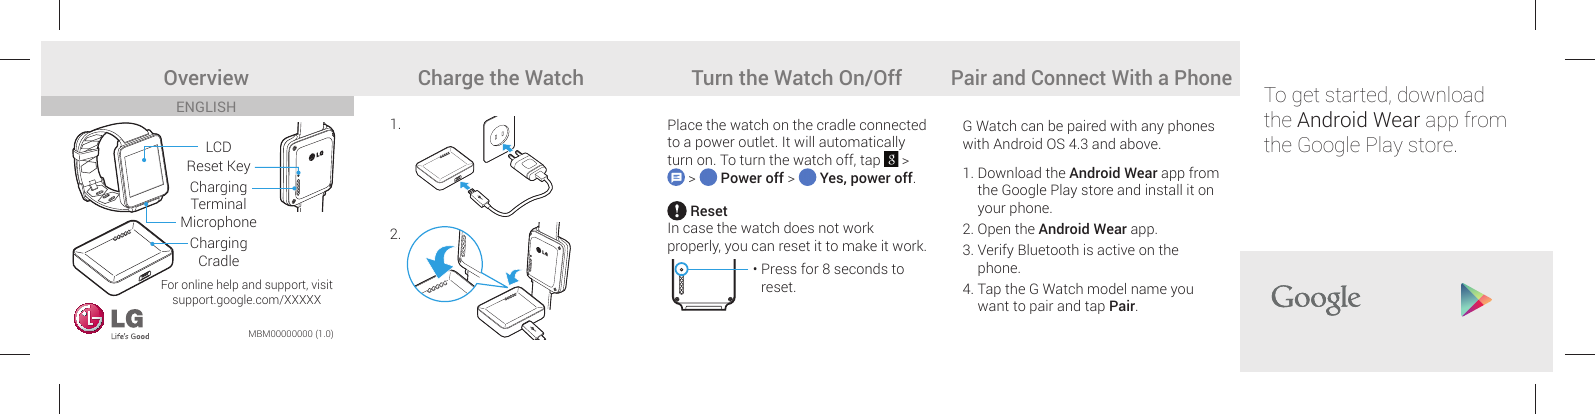 For online help and support, visitsupport.google.com/XXXXXPlace the watch on the cradle connected to a power outlet. It will automatically turn on. To turn the watch off, tap   &gt;  &gt;   Power off &gt;   Yes, power off.G Watch can be paired with any phones with Android OS 4.3 and above.  1.  Download the Android Wear app from the Google Play store and install it on your phone. 2.  Open the Android Wear app.3.  Verify Bluetooth is active on the phone. 4.  Tap the G Watch model name you want to pair and tap Pair.  ResetIn case the watch does not work properly, you can reset it to make it work.•  Press for 8 seconds to reset.ENGLISHMBM00000000 (1.0)Overview Charge the Watch Turn the Watch On/OffPair and Connect With a PhoneLCDMicrophoneCharging CradleReset KeyCharging Terminal1.2.To get started, download the Android Wear app from the Google Play store.